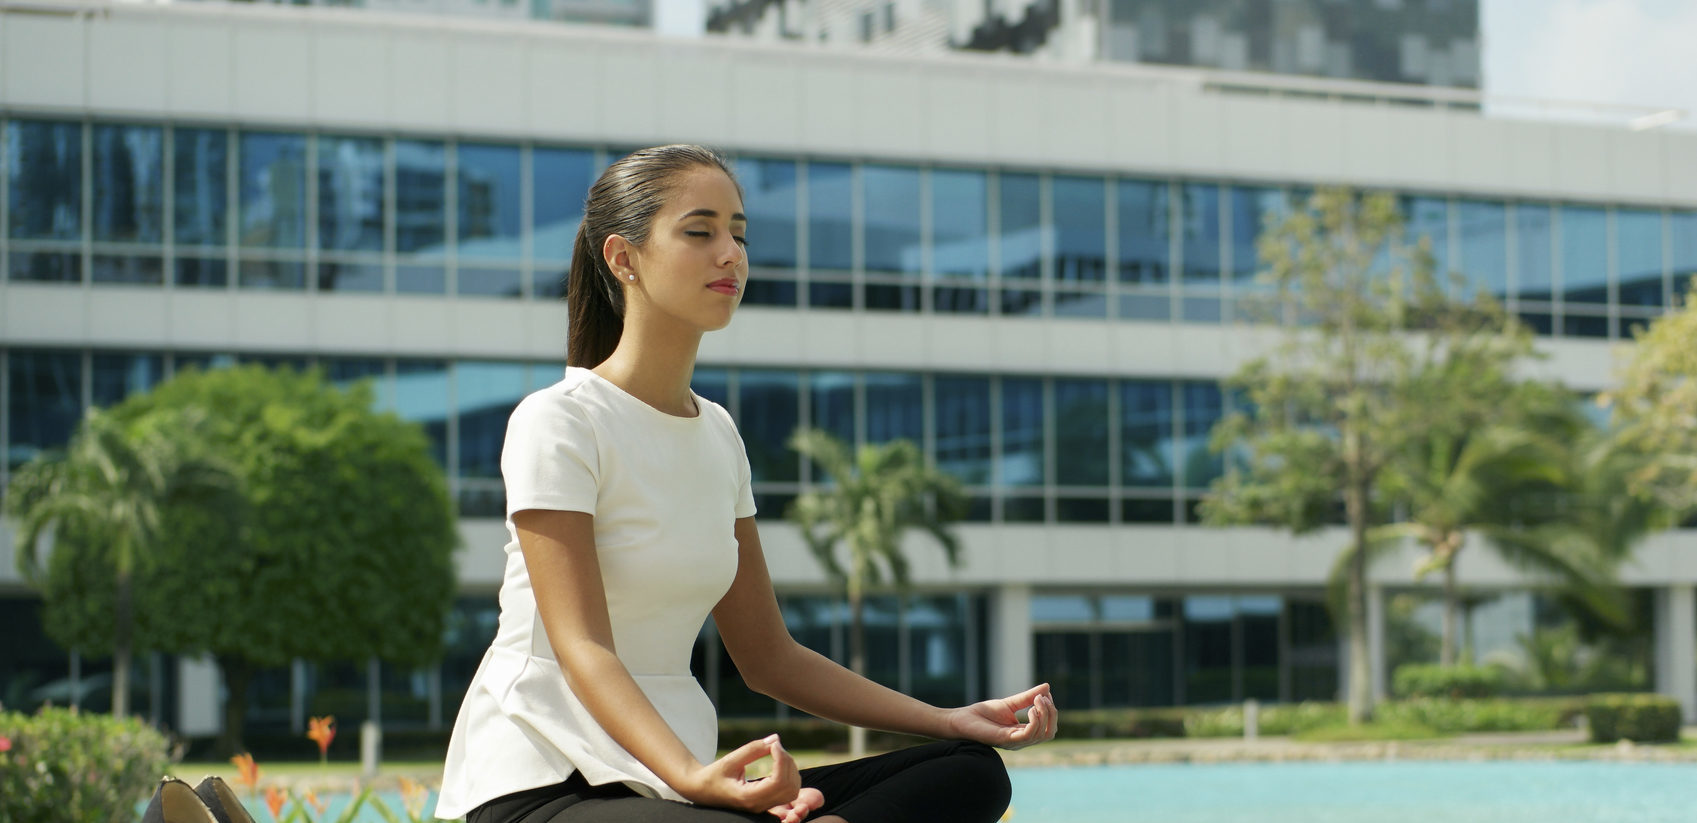 How do I find the best tips in meditation training? 7